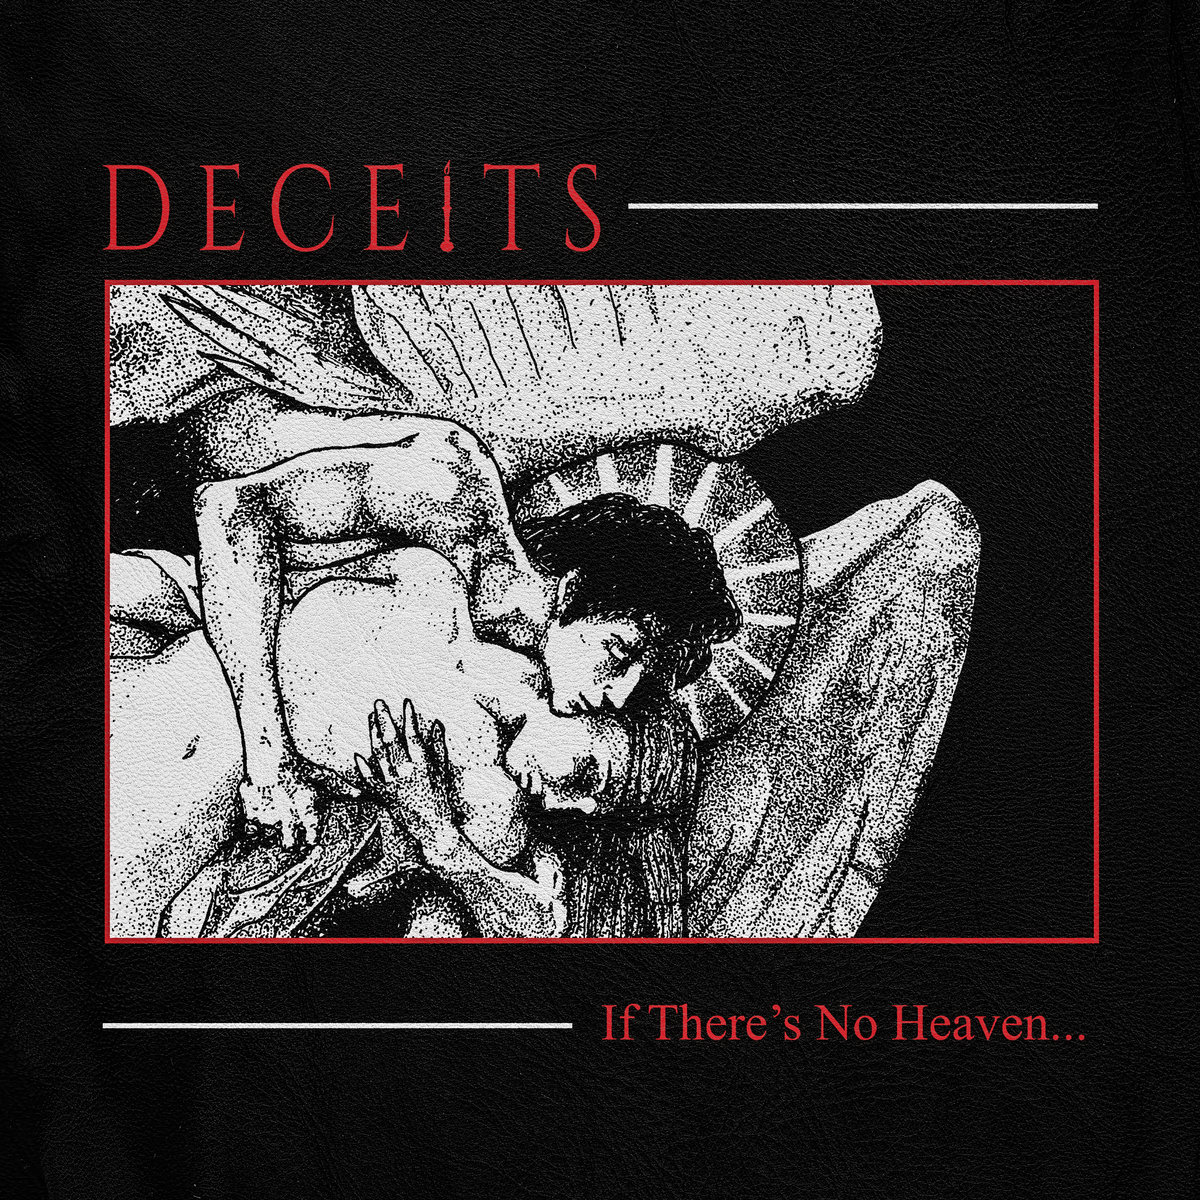 DECEITS, “If There’s No Heaven…”